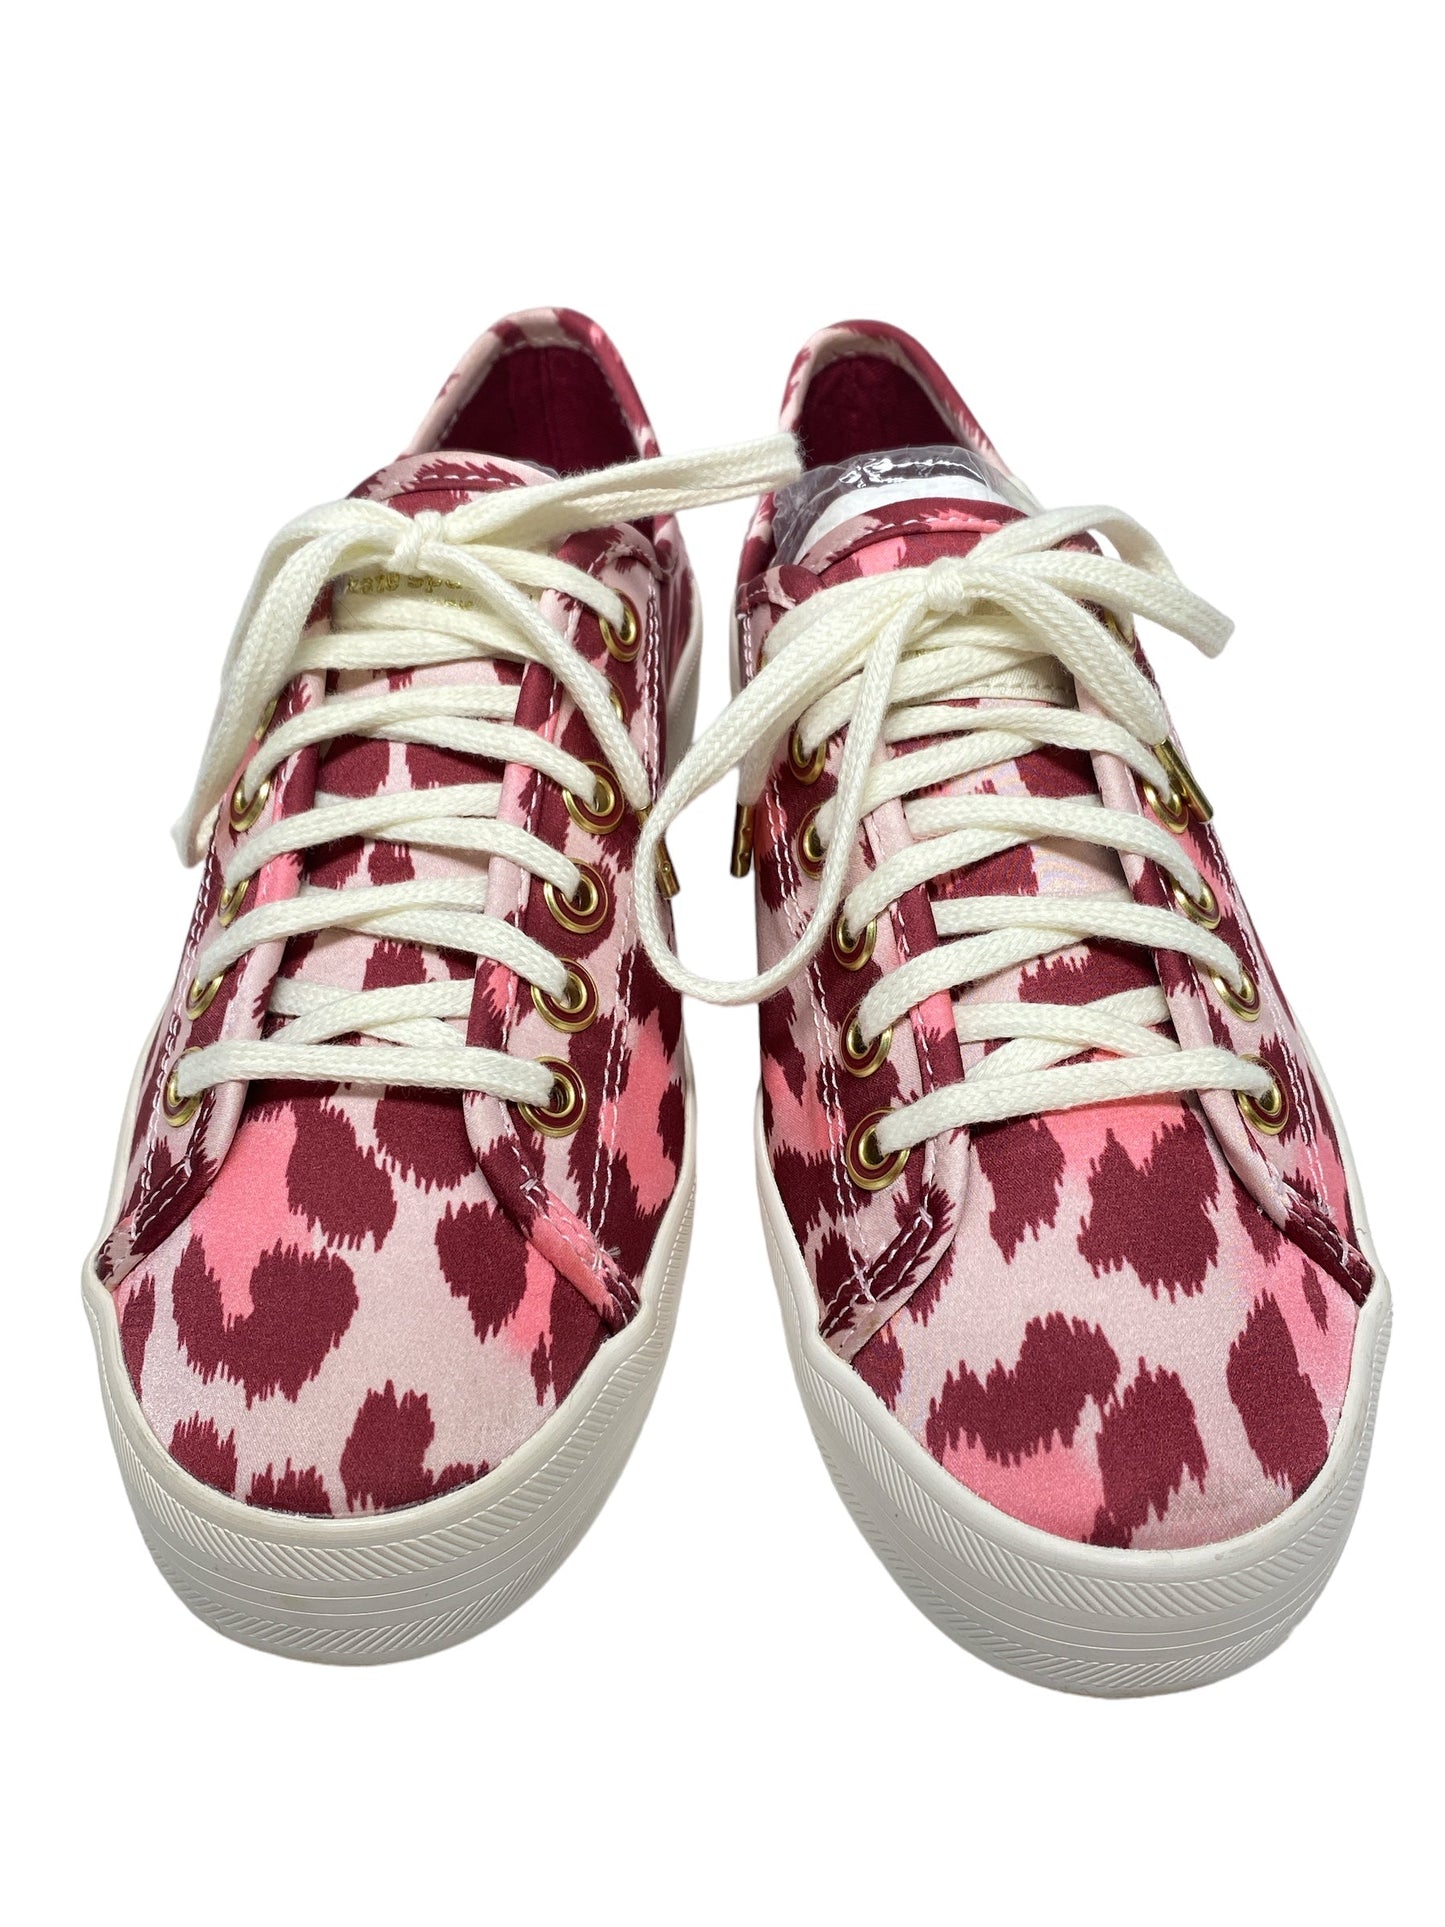 Shoes Sneakers By Keds  Kate Spade Size: 6